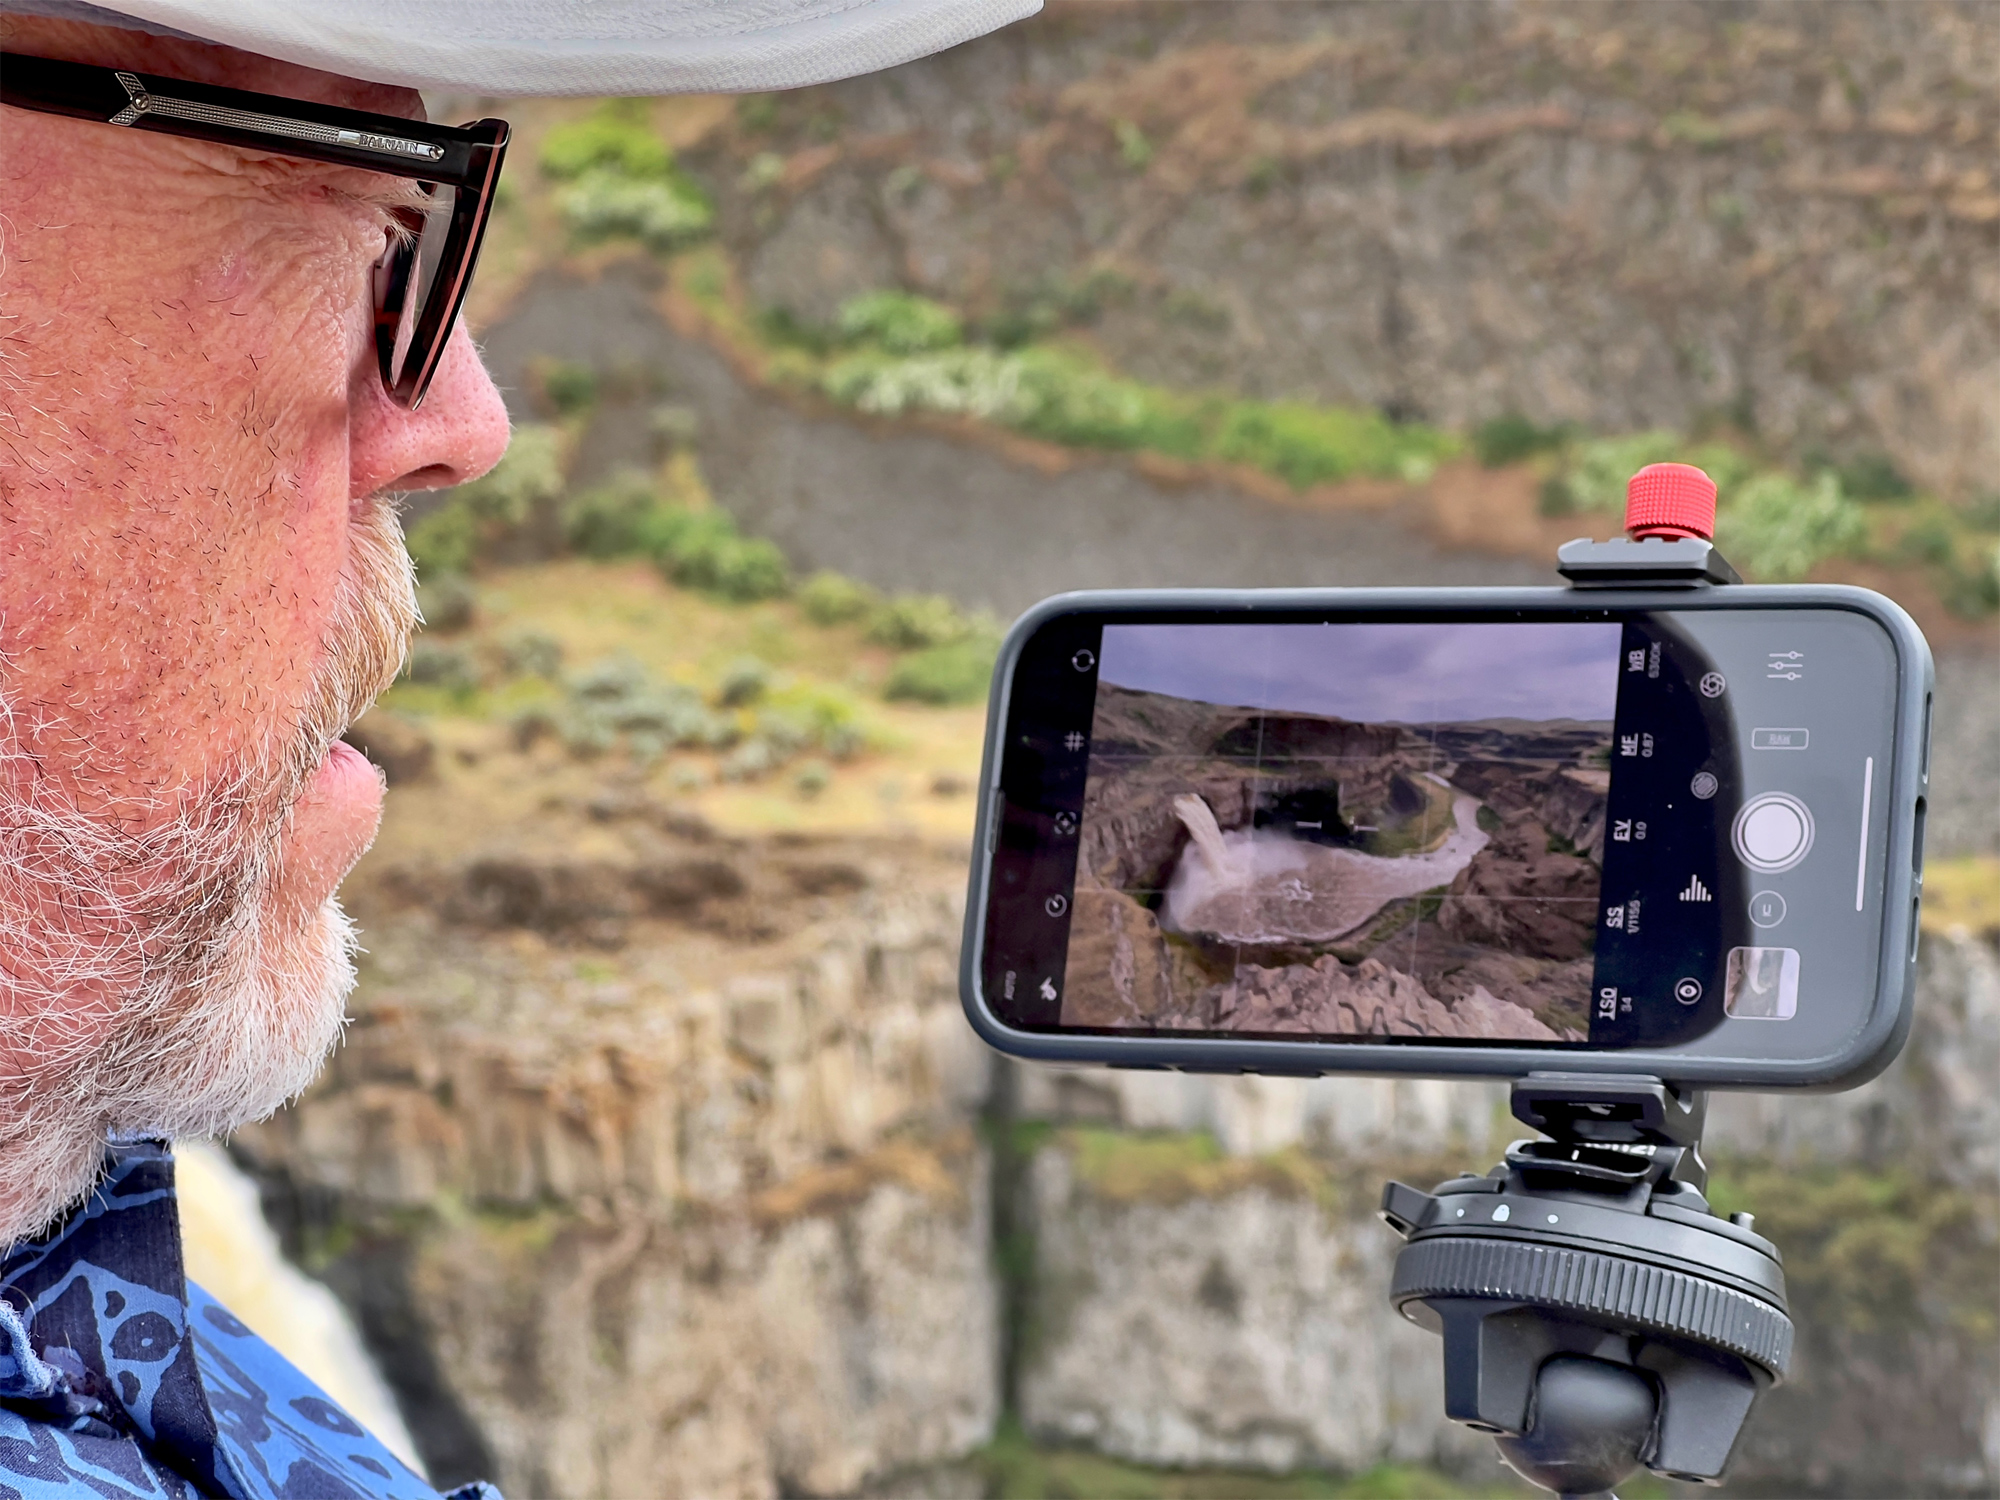 Kevin using the Reeflex app to capture long exposure image of Palouse Falls